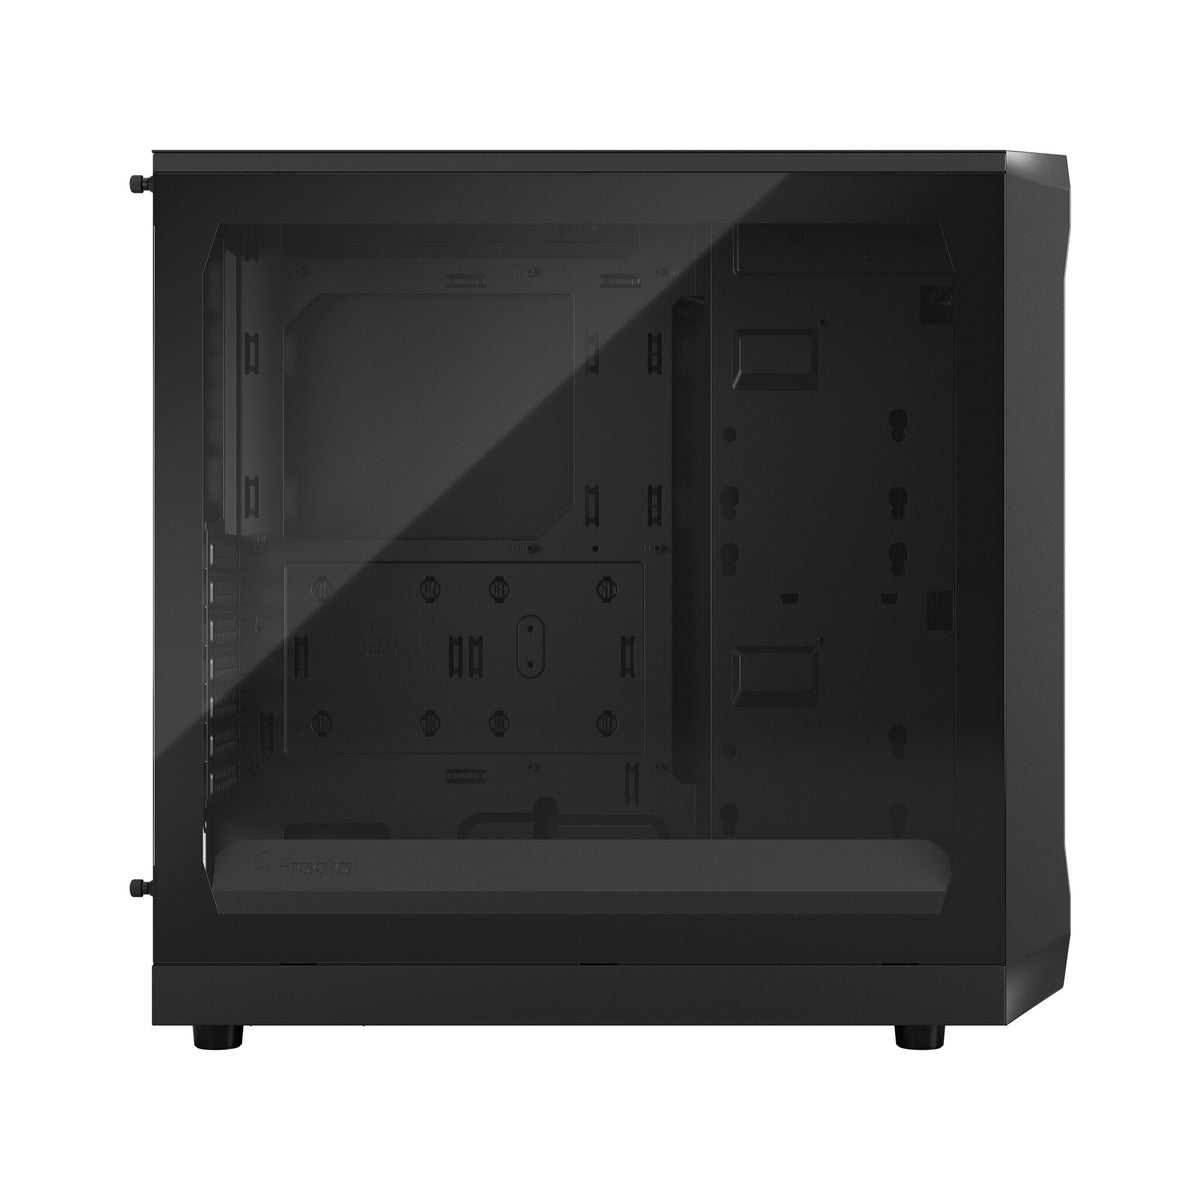 Fractal Design Focus 2 -  ATX Mid Tower Case in Black / Clear